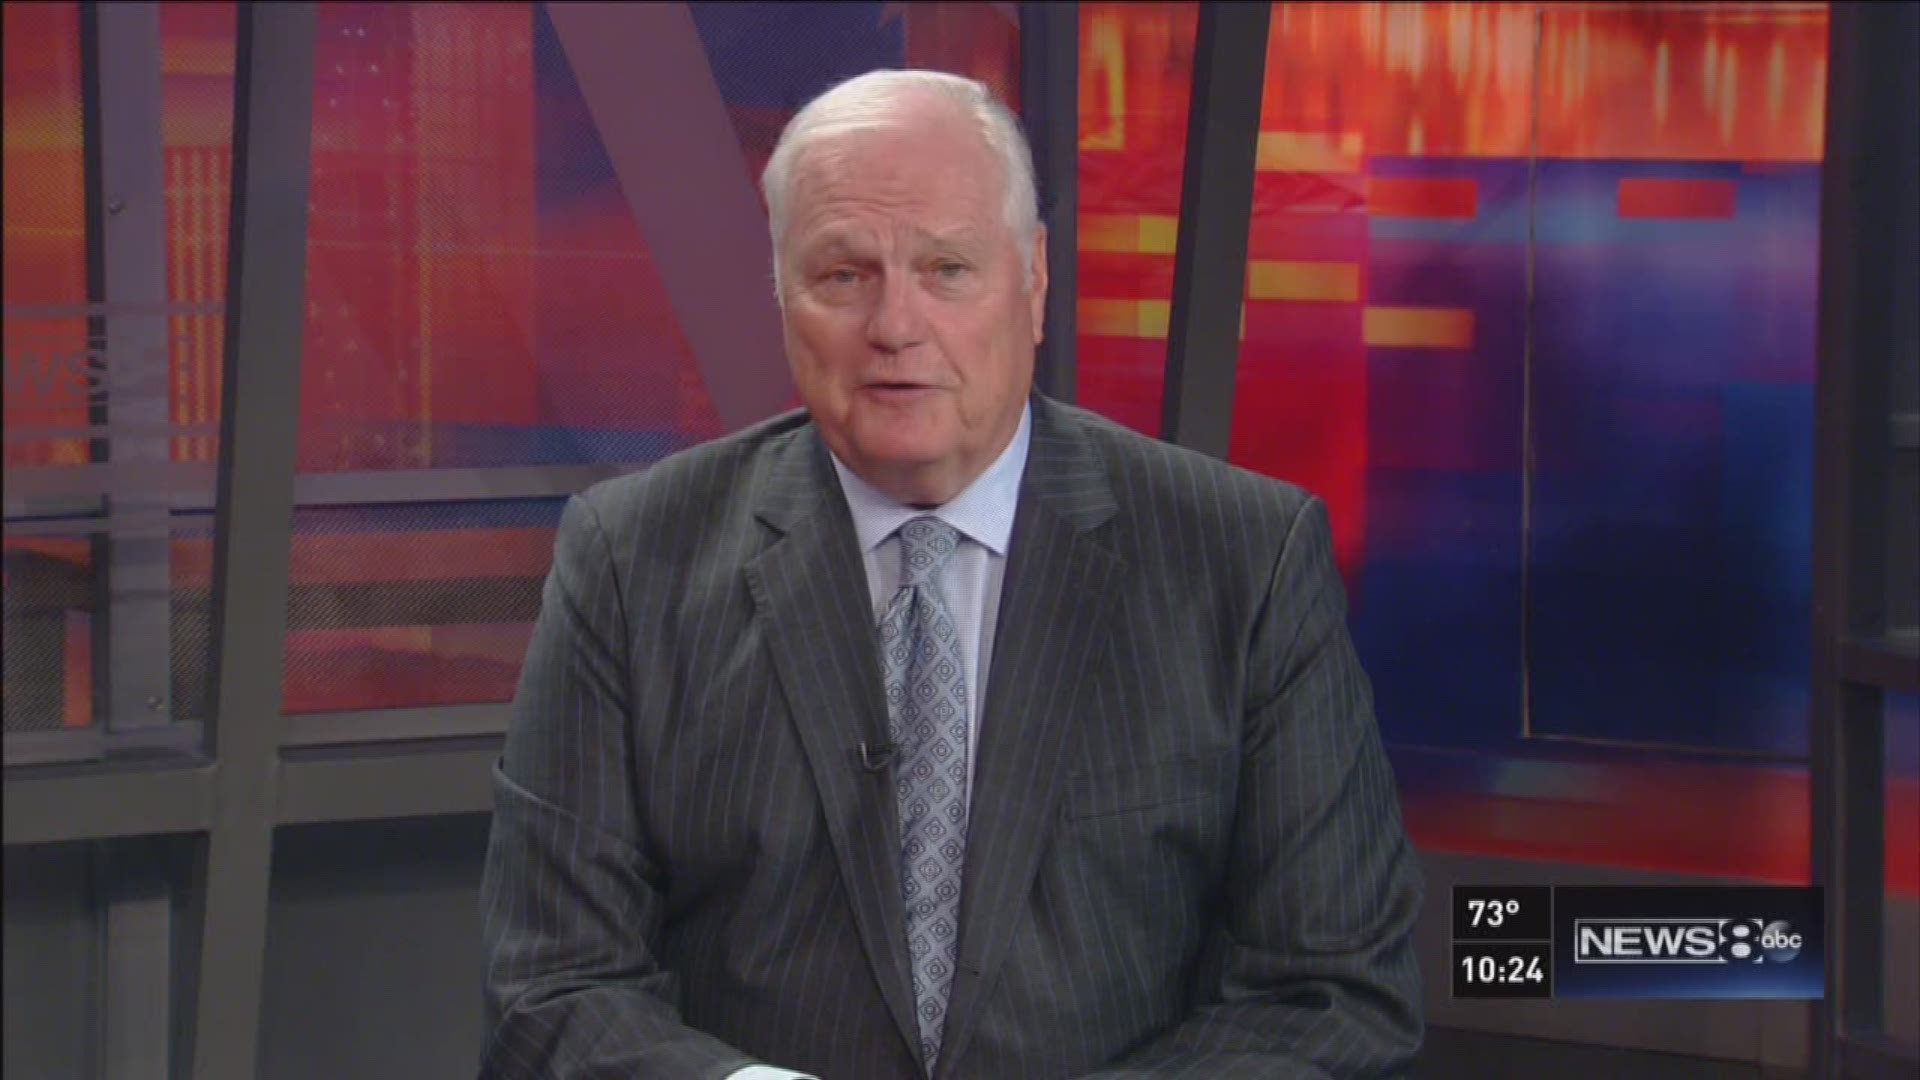 WFAA Sports' Dale Hansen shares his thoughts after Baylor University fired head football coach Art Briles.